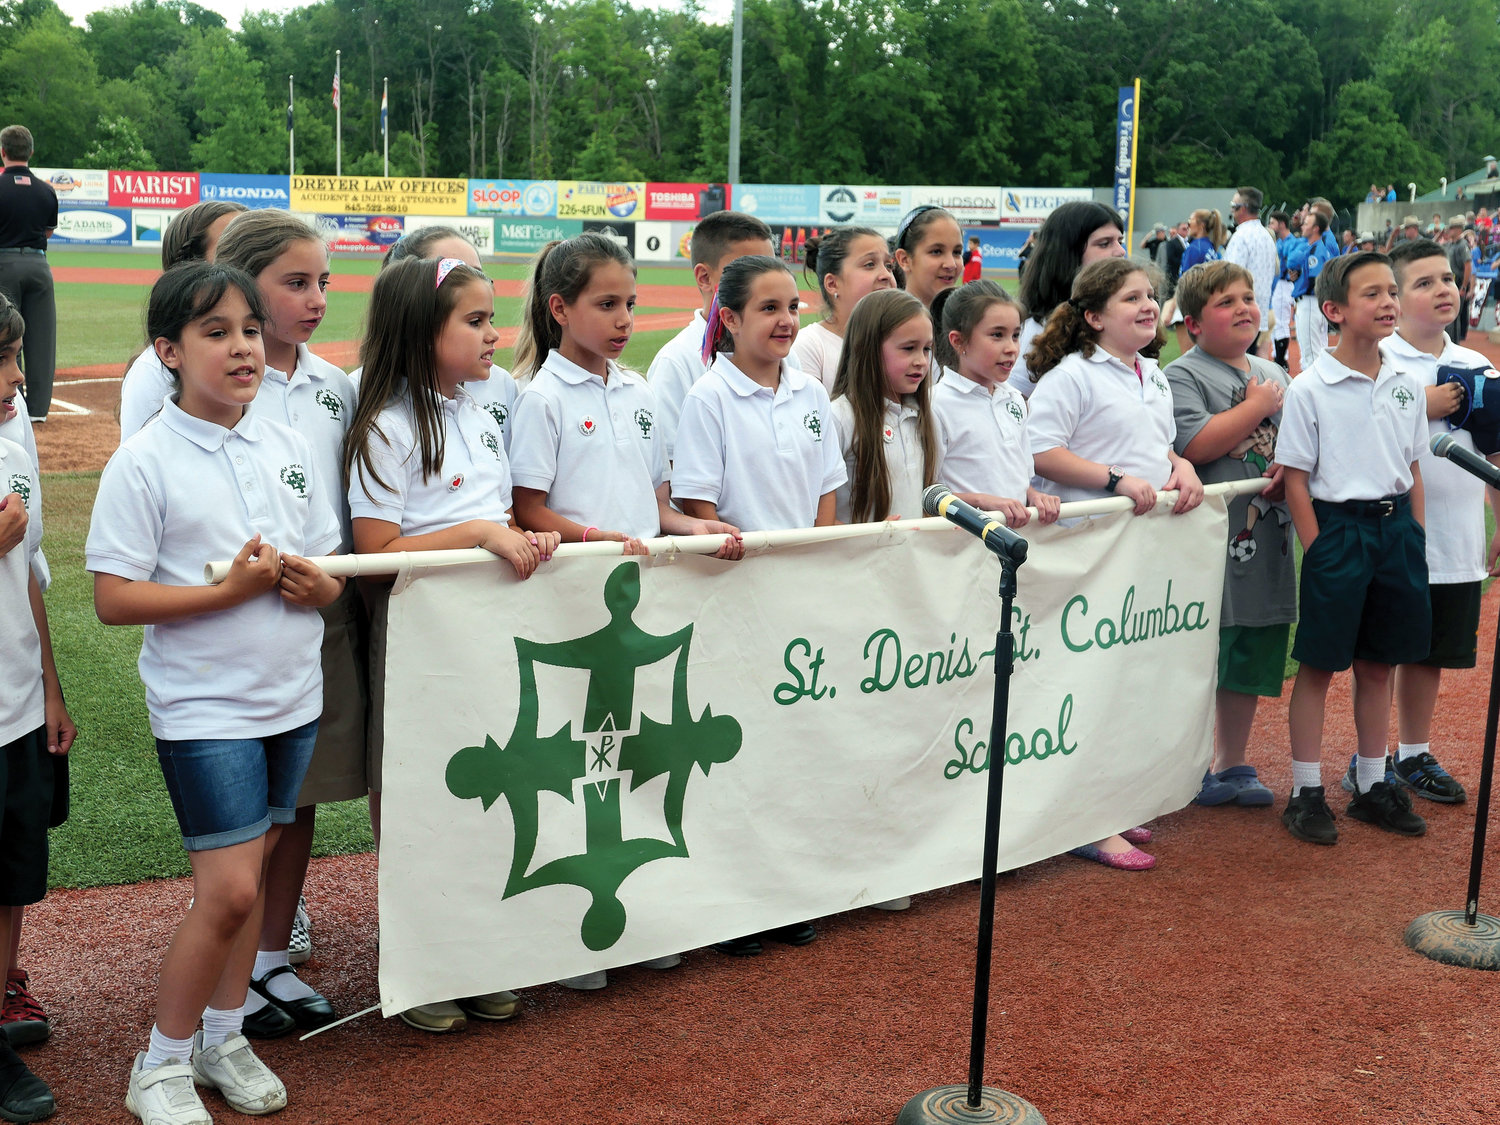 Students from St. Denis-St. Columba School in Hopewell Junction sing the National Anthem.